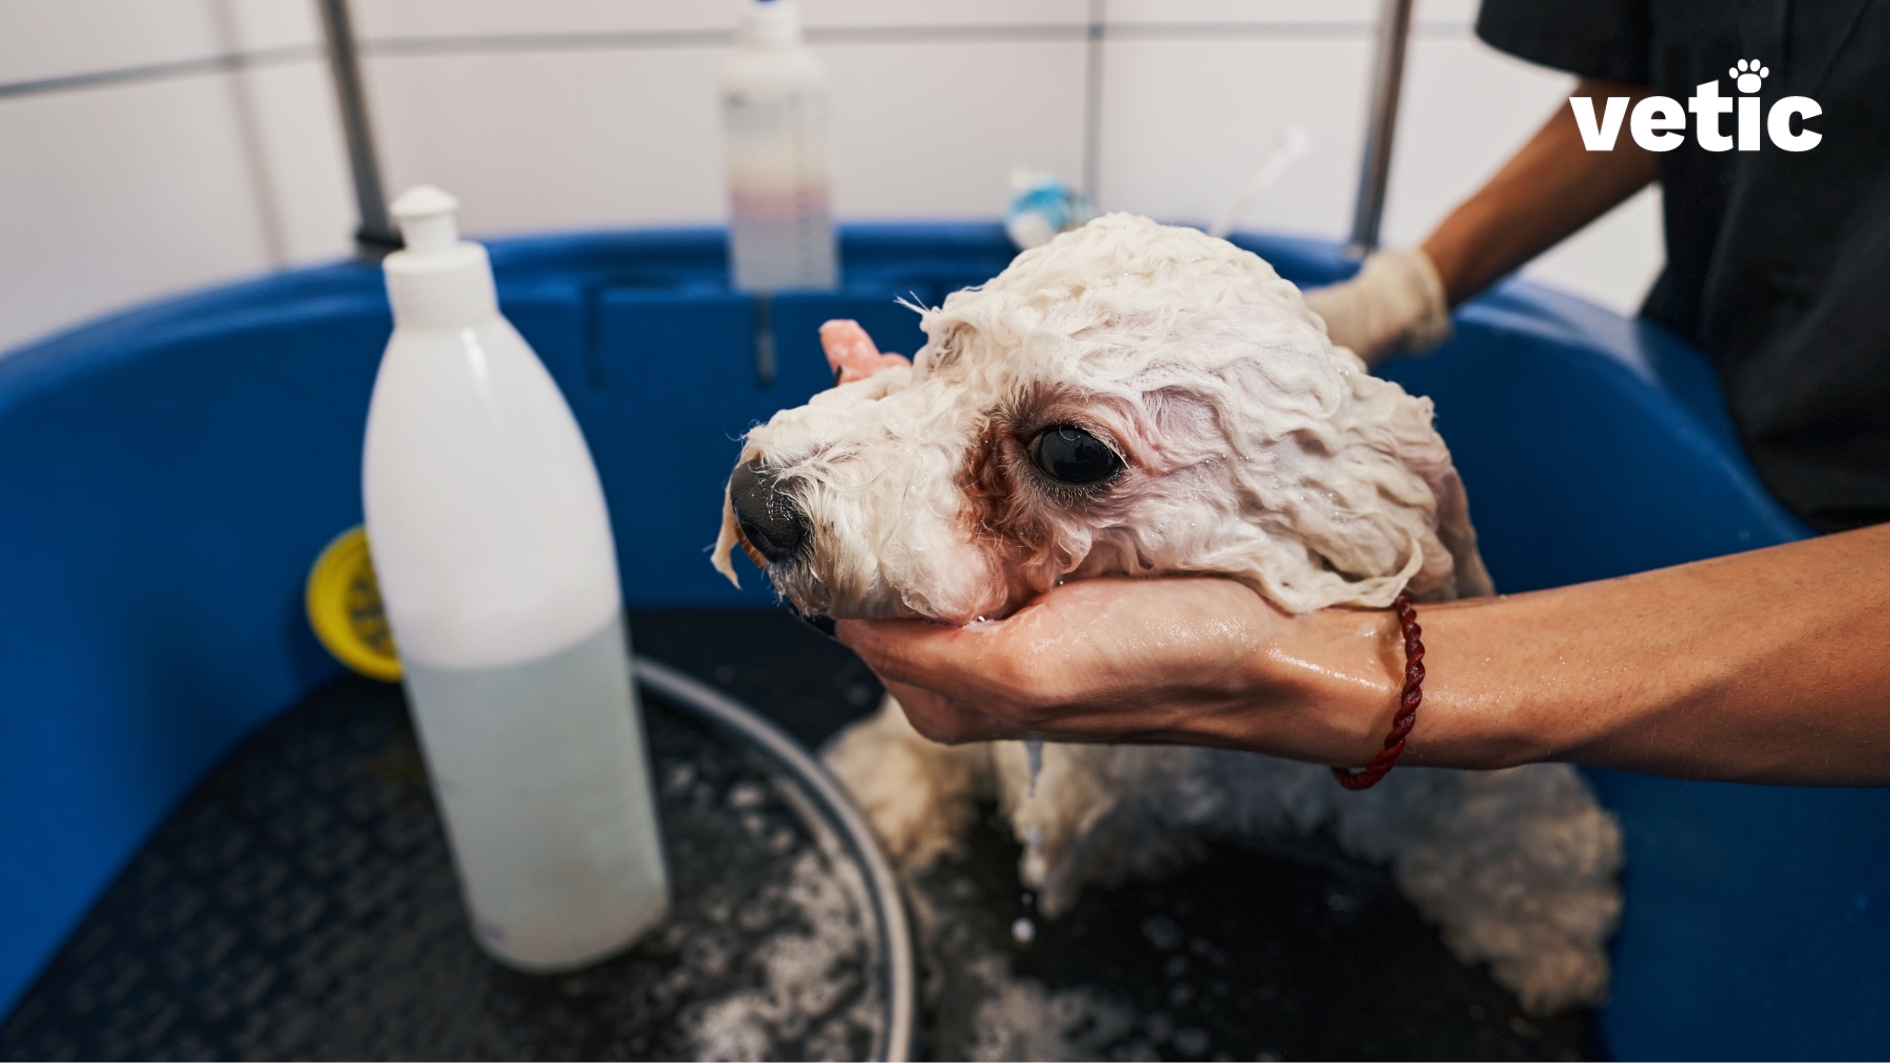 Hands applying medicated shampoo on a white long-haired dog at a grooming station. Medicated baths can help prevent and treat excess foot licking due to parasites and infections.